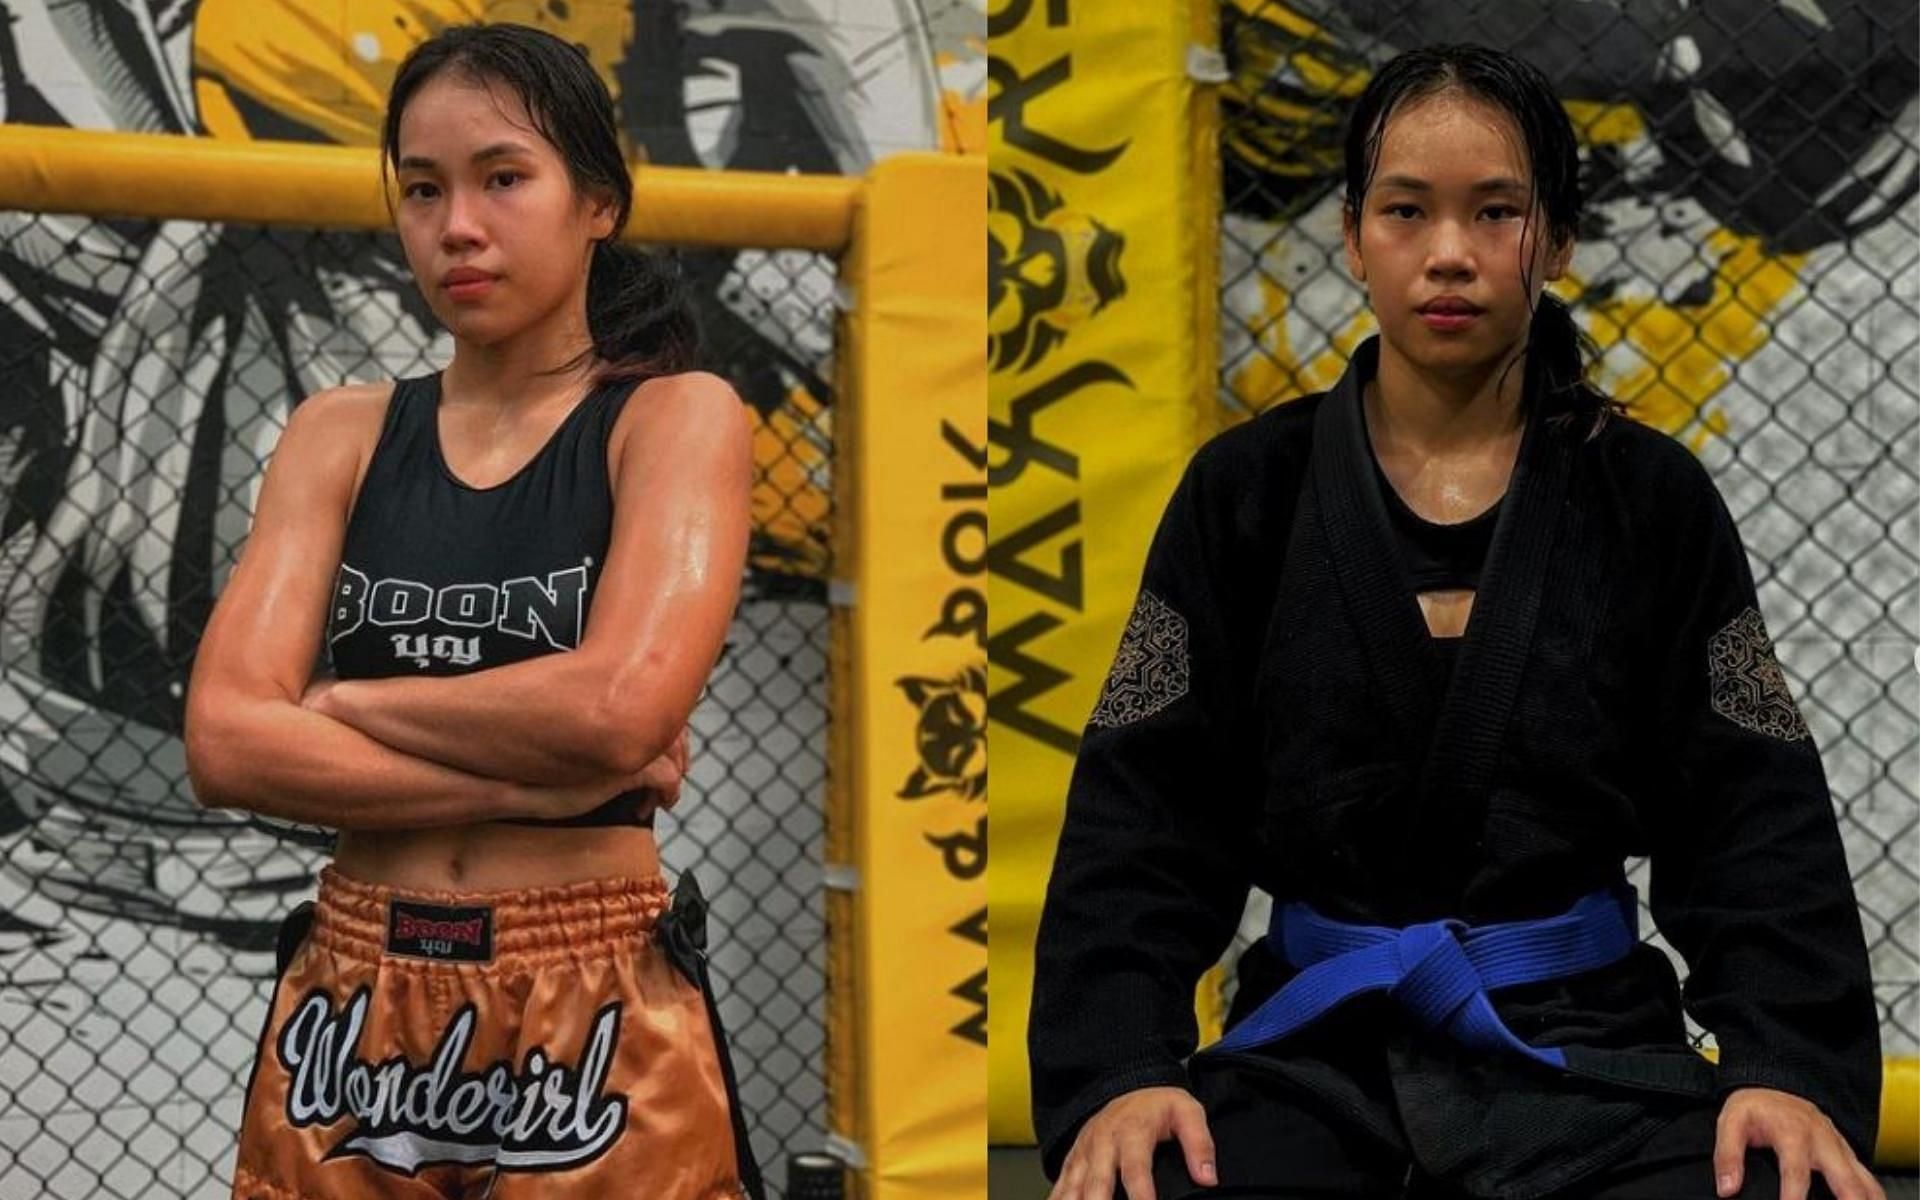 ONE Championship Muay Thai star Wondergirl Jaroonsak will have a bluebelt in Jiu-jitsu ahead of her MMA debut at ONE 157. (Images courtesy: @natwondergirl on Instagram)